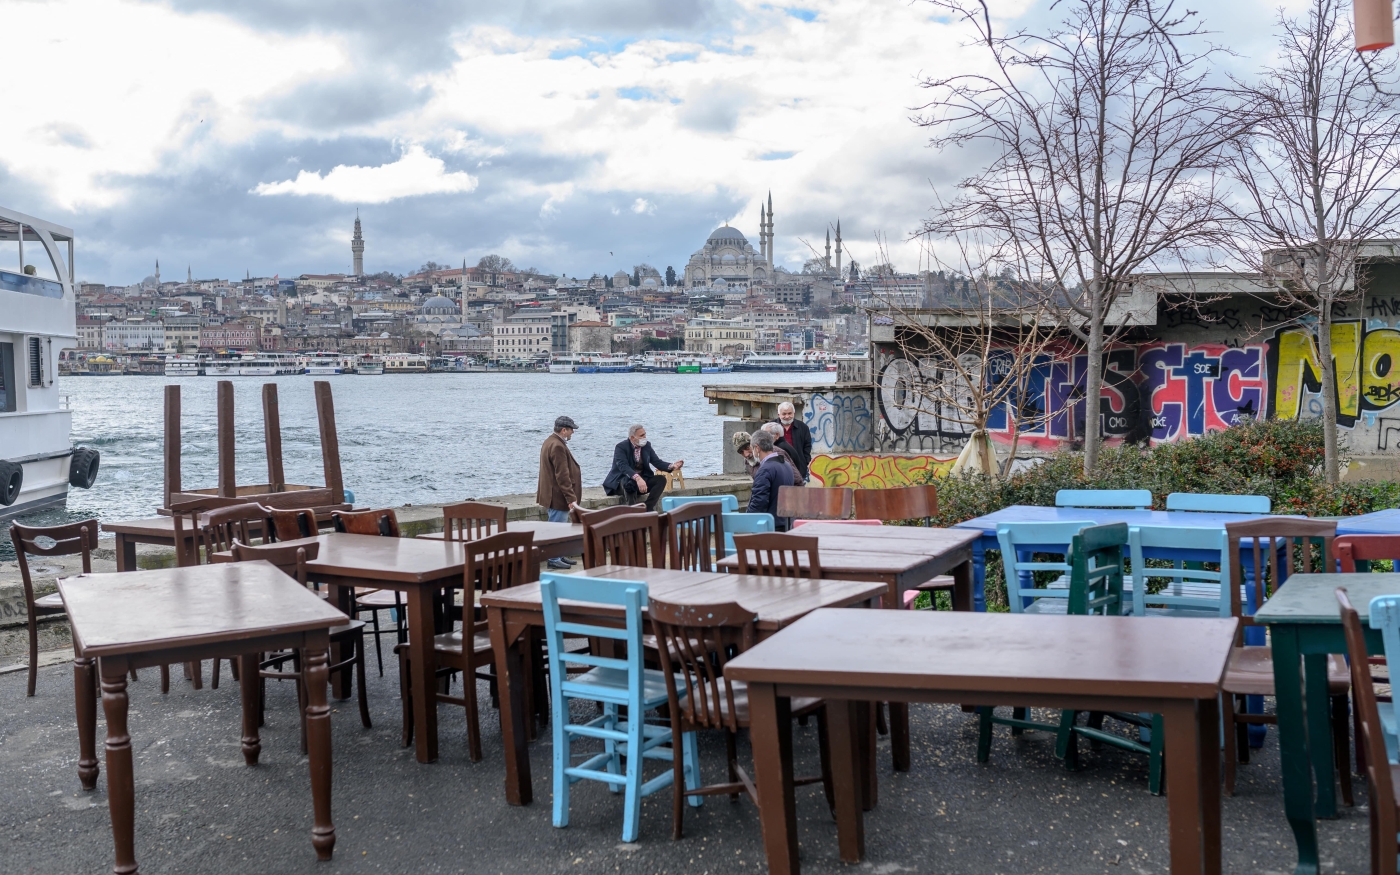 People talk by seaside by a restaurant at Karakoy, Istanbul, on 2 March 2021, before restrictions were again placed on dining out. (Bulent Kilic/AFP)